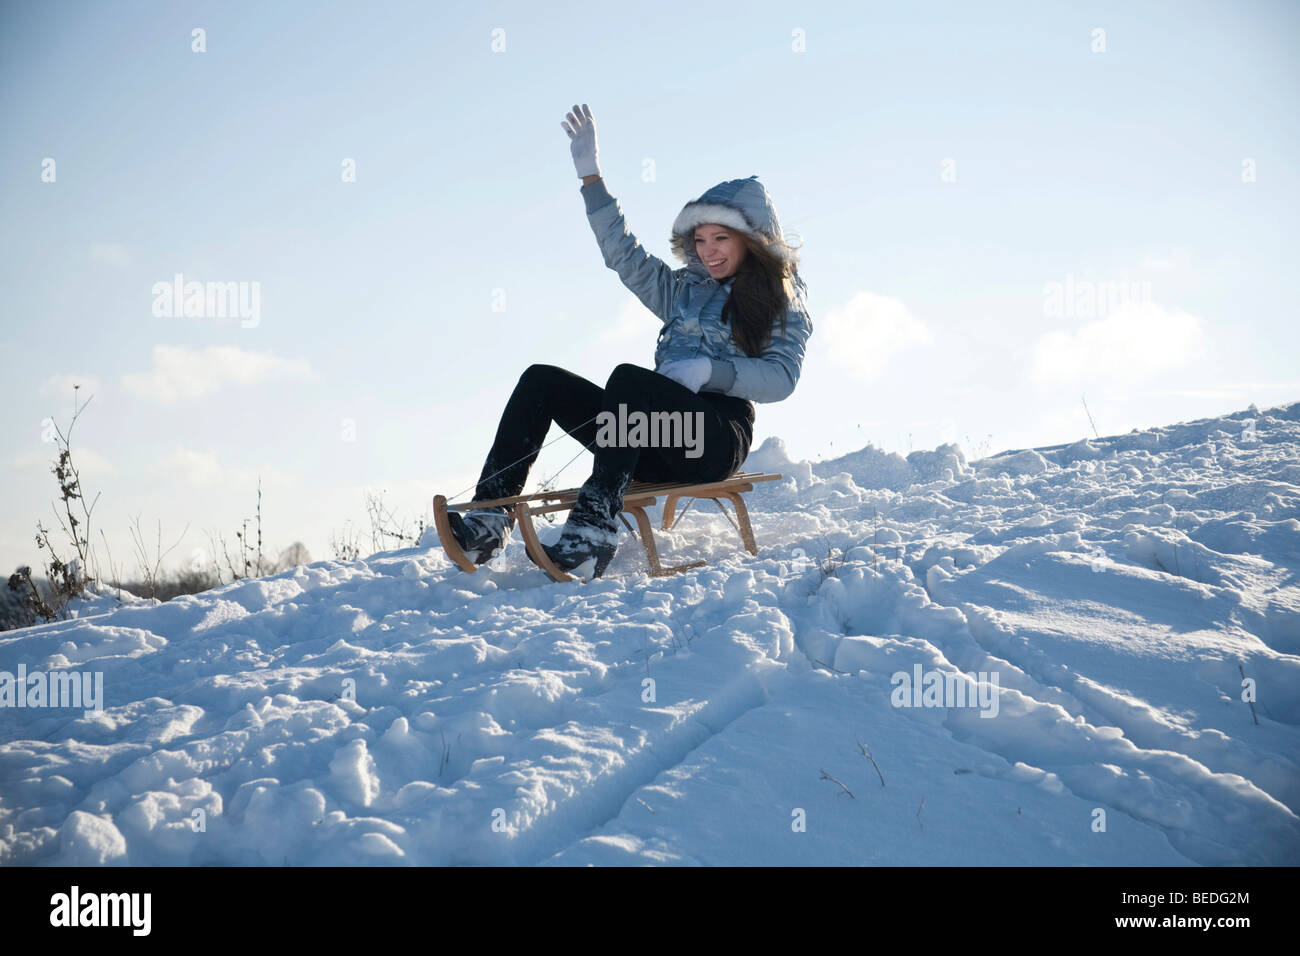 Young woman sledding in snow Stock Photo